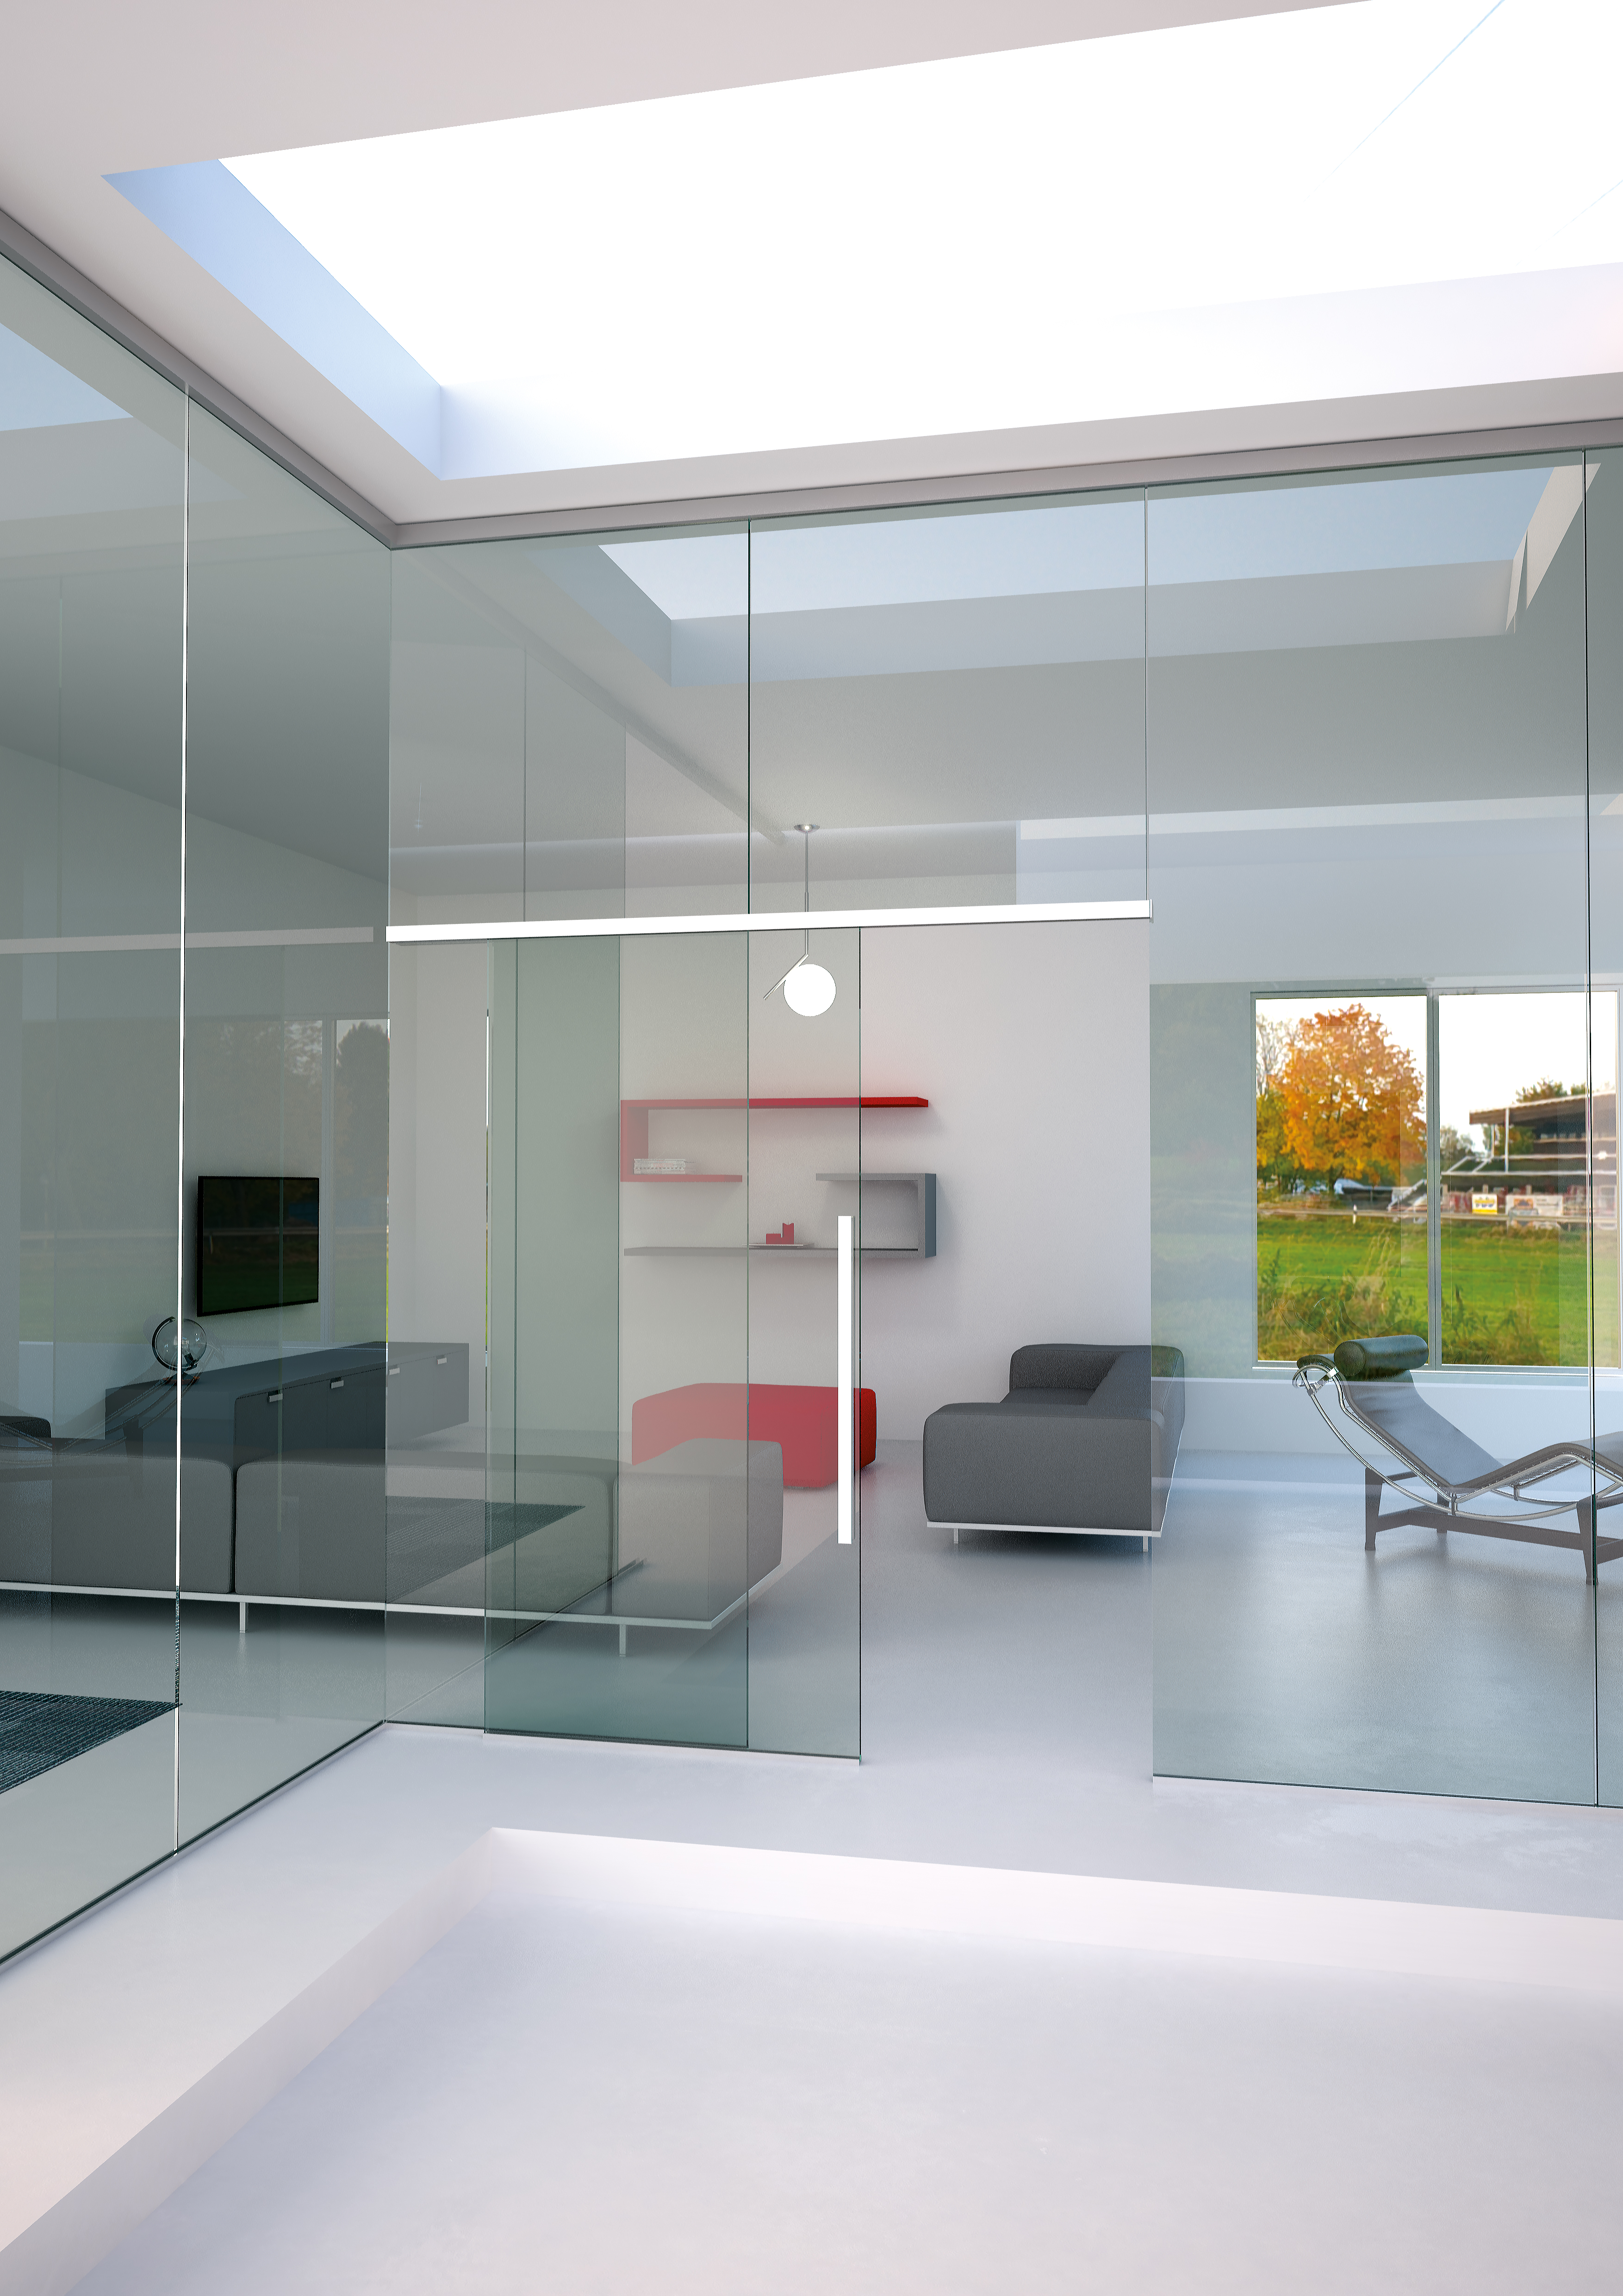 frameless wall partitions, partition systems, modular office space, wall partitions, cubicles